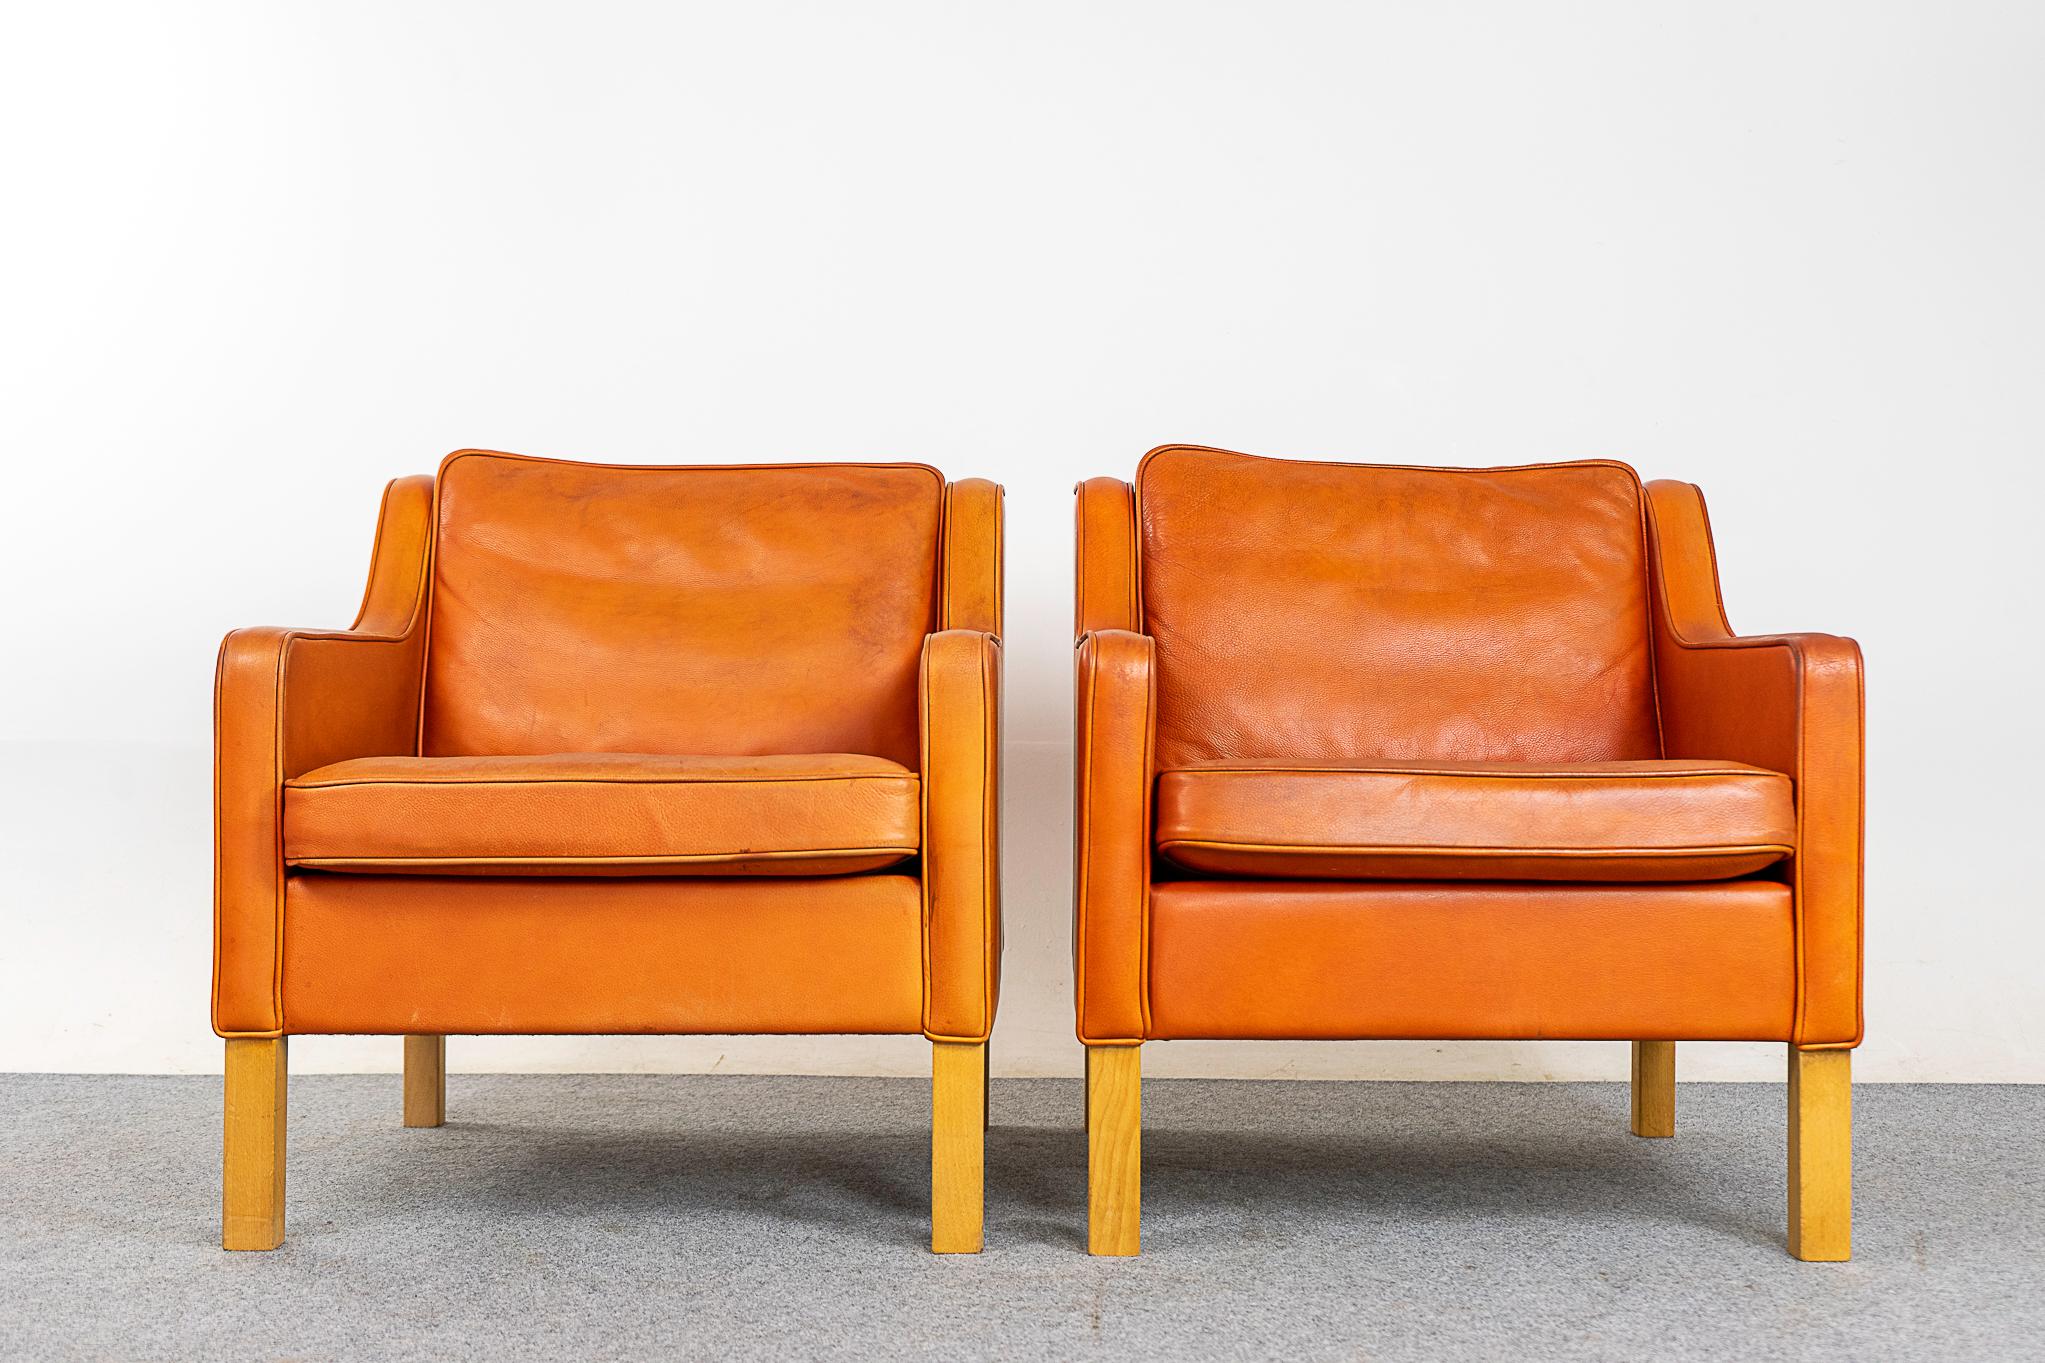 Leather and beech wood Danish lounge chair pair, circa 1960's. Original tobacco brown leather with lovely patina.

Please inquire for remote and international shipping rates.